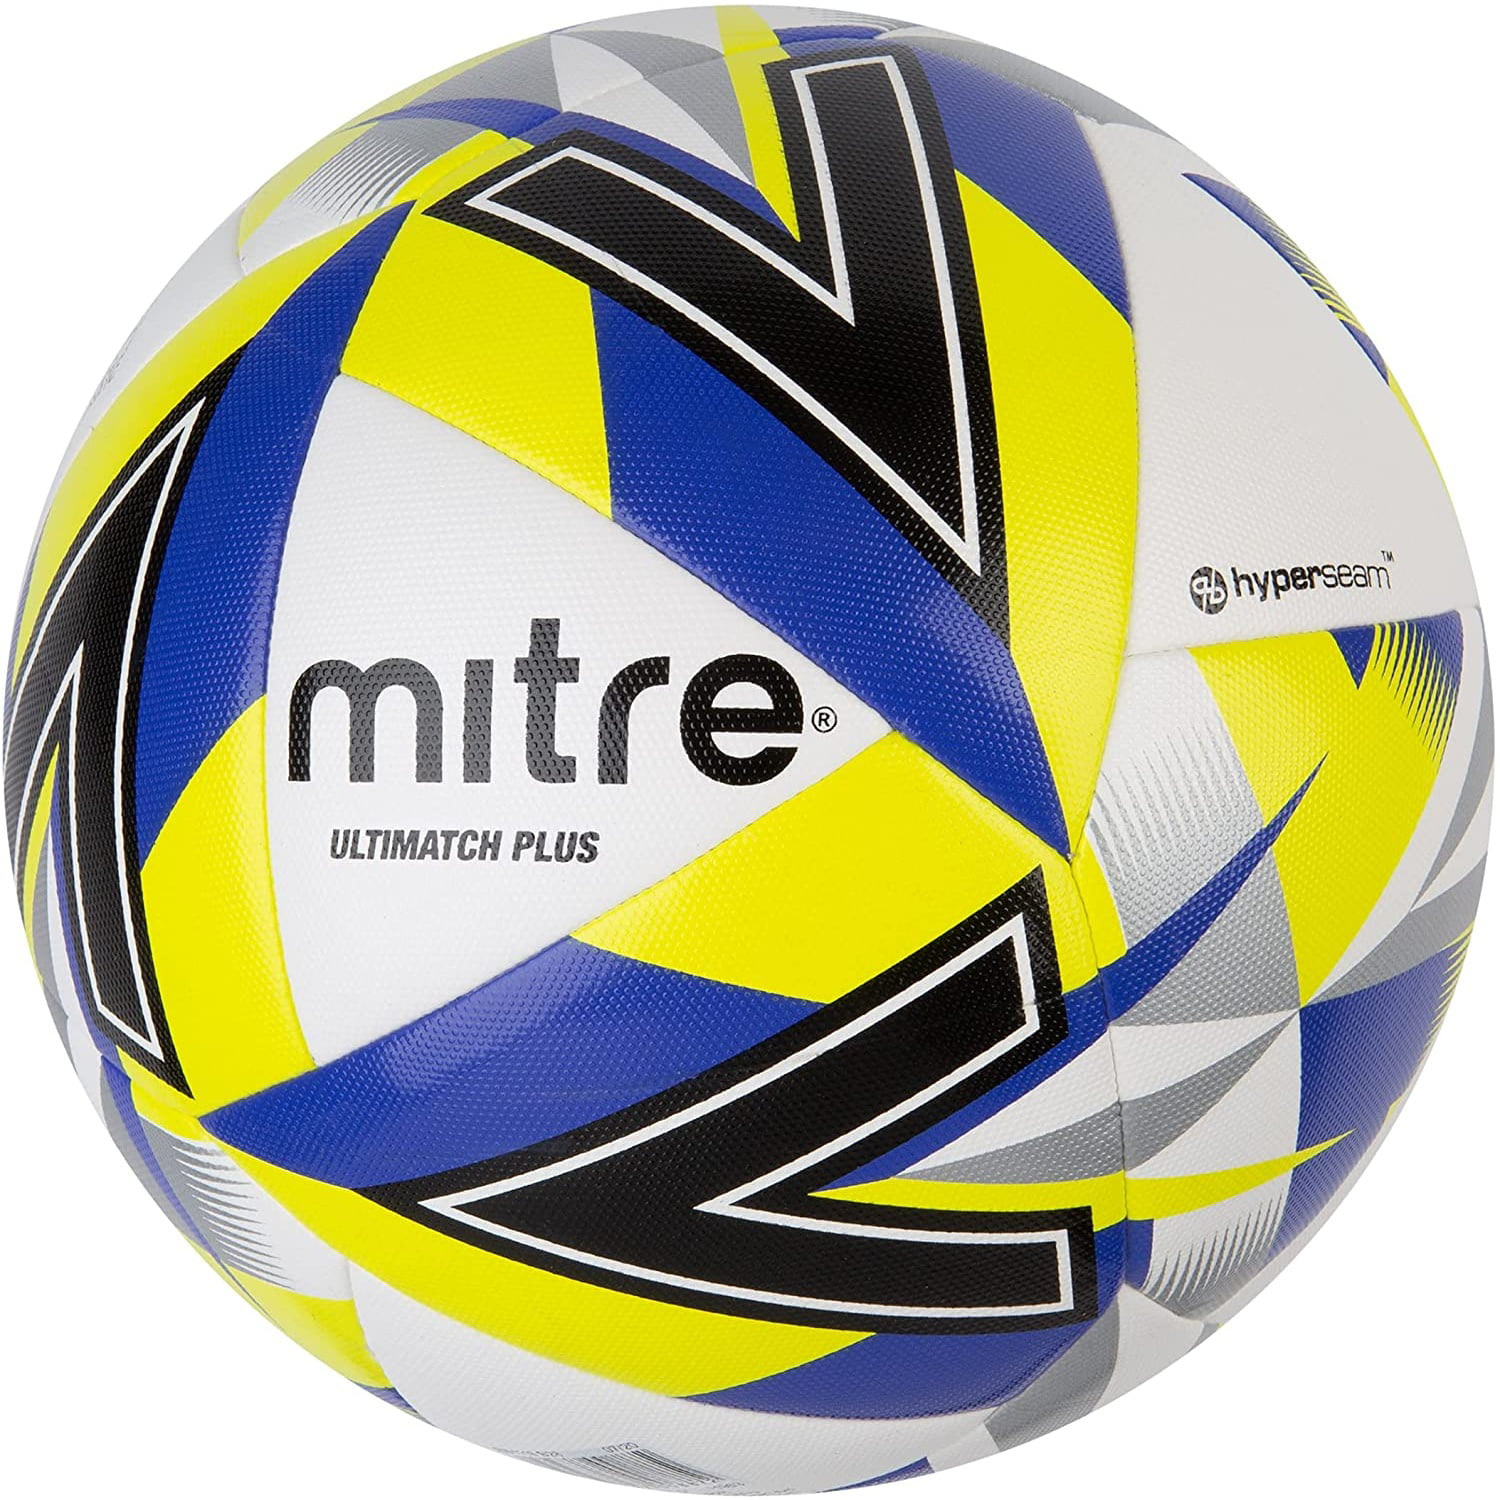 Size 5 Mitre Ultimatch Max Top-Level Match Football -Pack of 5 With Carry New 